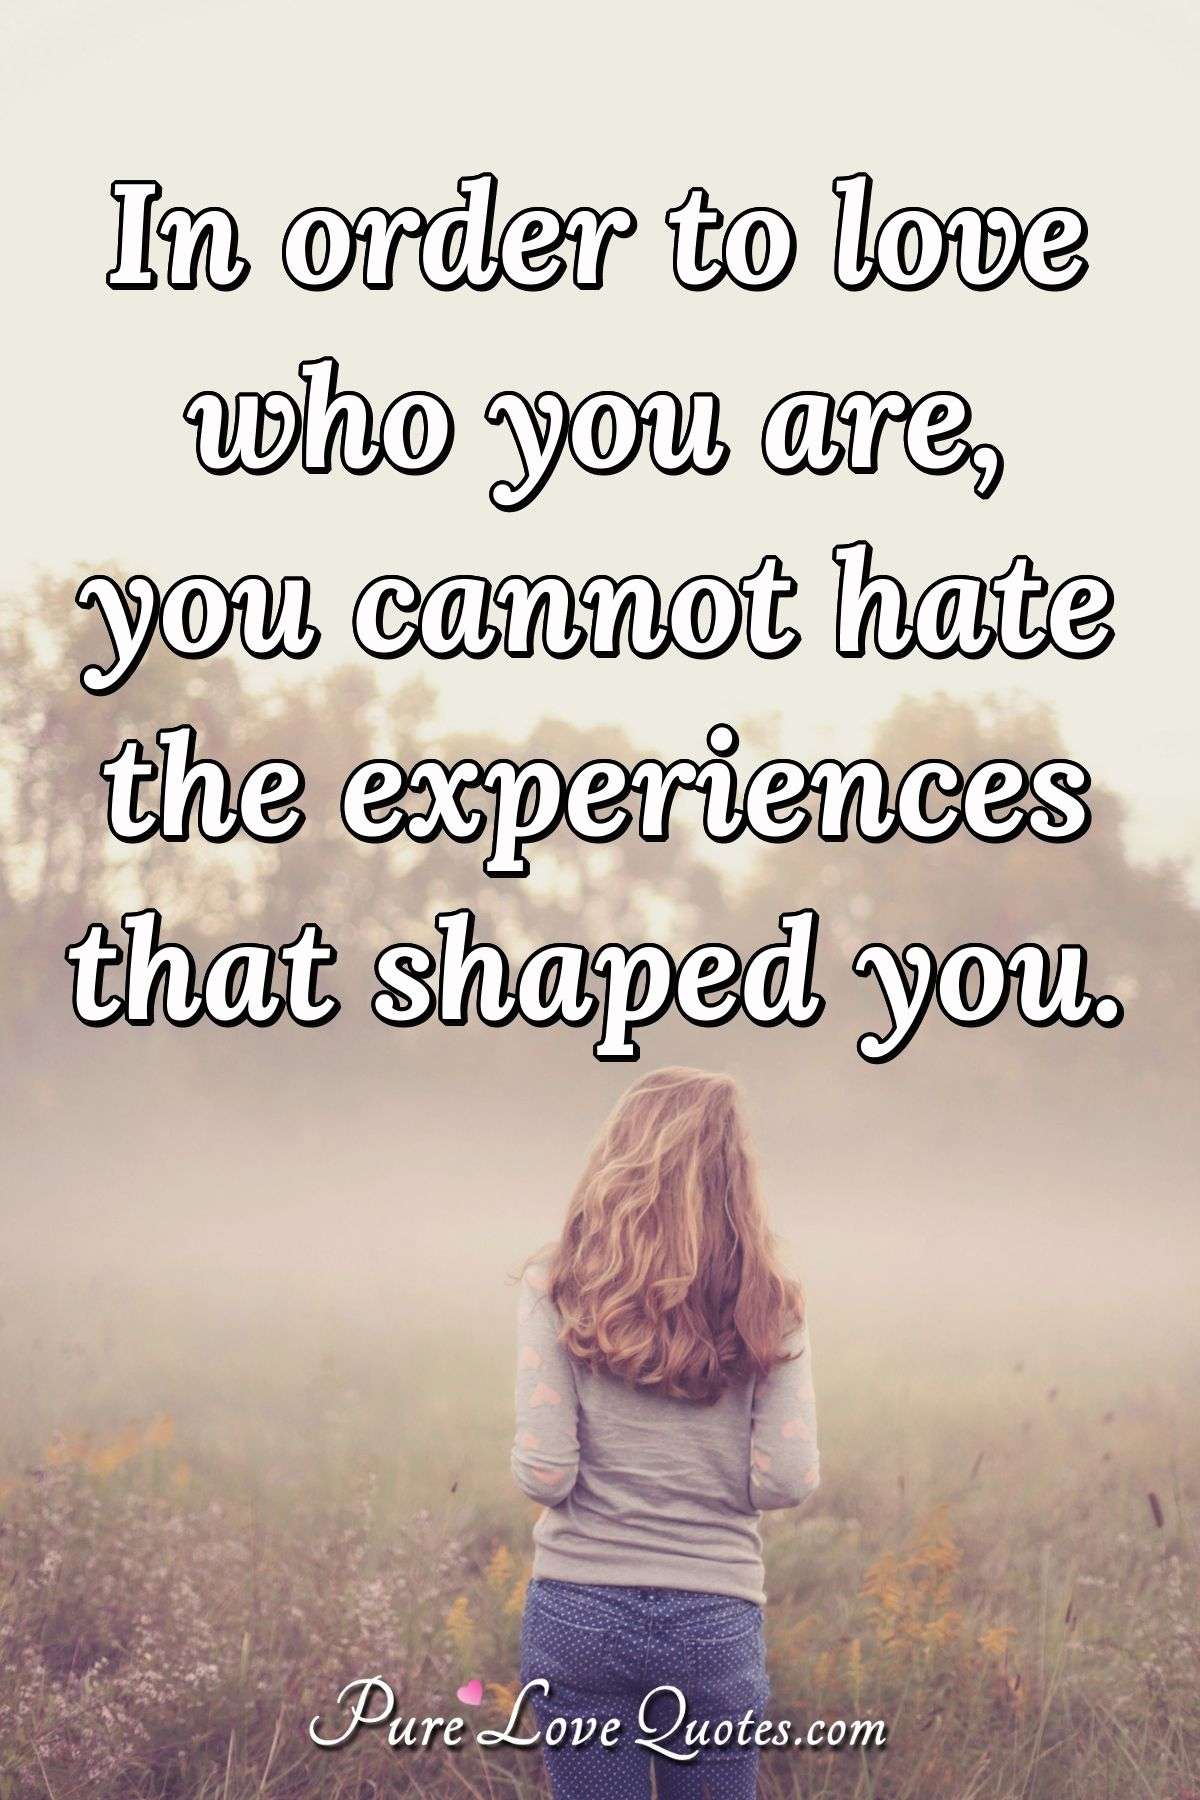 In order to love who you are, you cannot hate the experiences that shaped you. - Anonymous